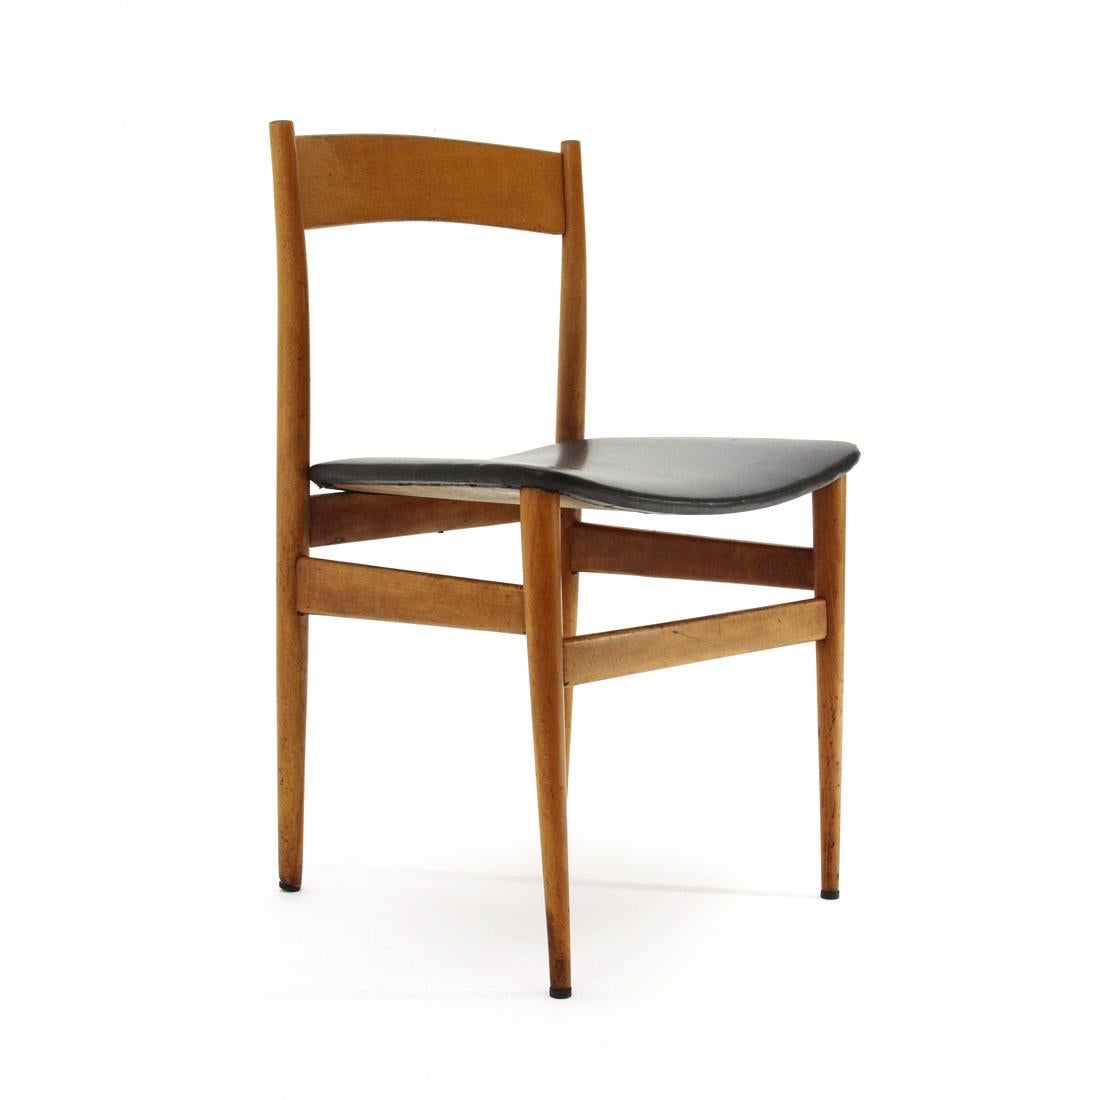 Made in Italy chair produced in the 1950s.
Structure in shaped wood.
Seat in curved wood padded and lined in imitation leather.
Backrest in curved wood.
Fair general conditions, solid structure, marks on the wooden part, cuts on the